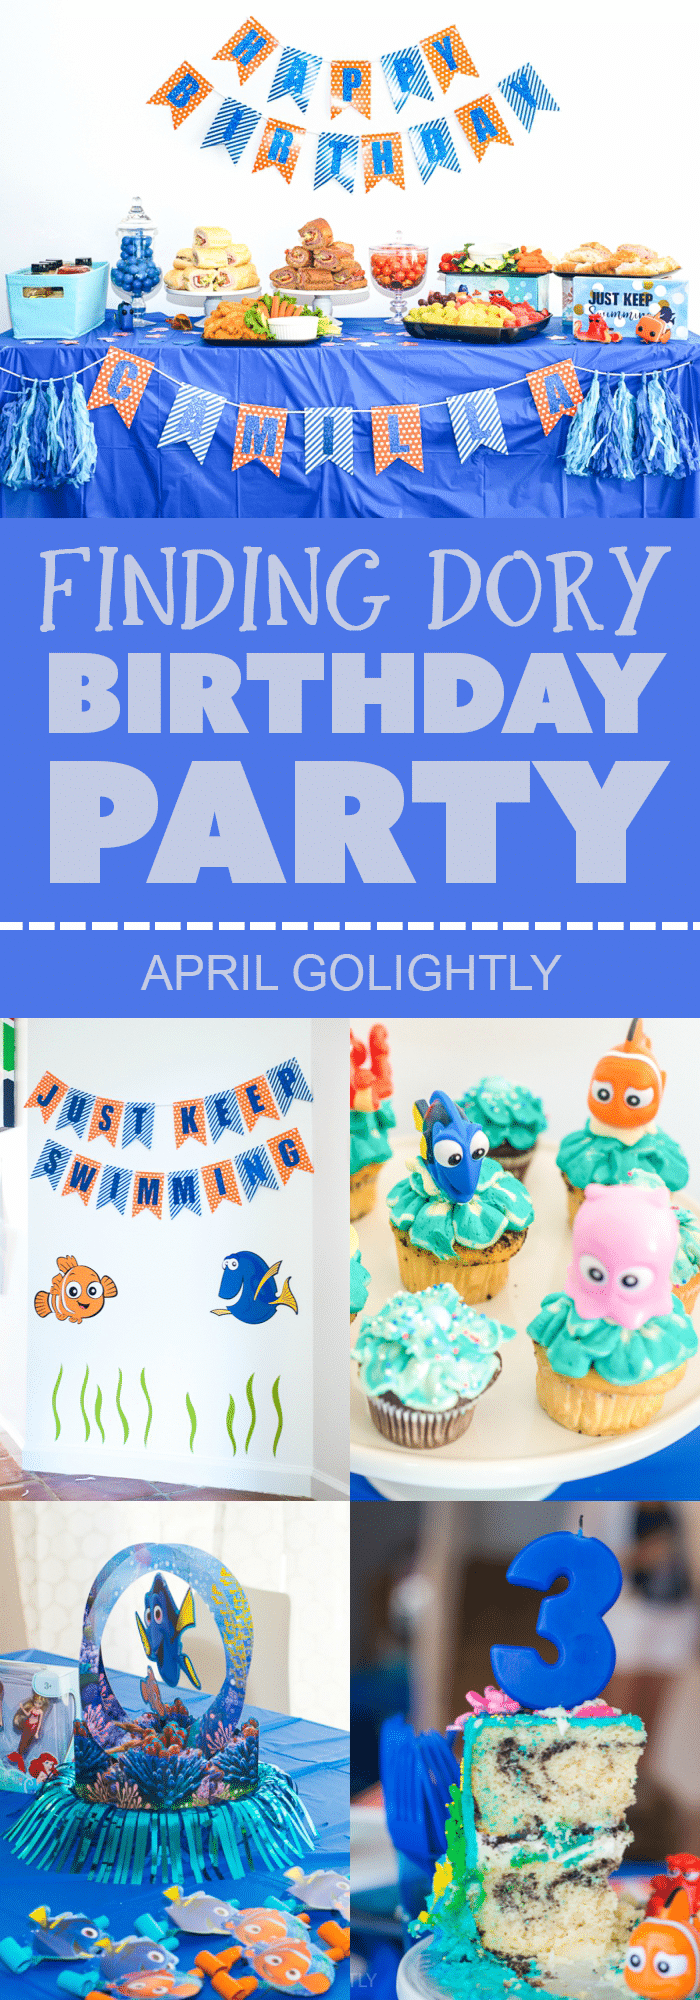 Finding Dory Birthday Party Ideas for a summer pool party with cake and cupcake ideas, party table, decor, and ideas on what stuff in the gift bags